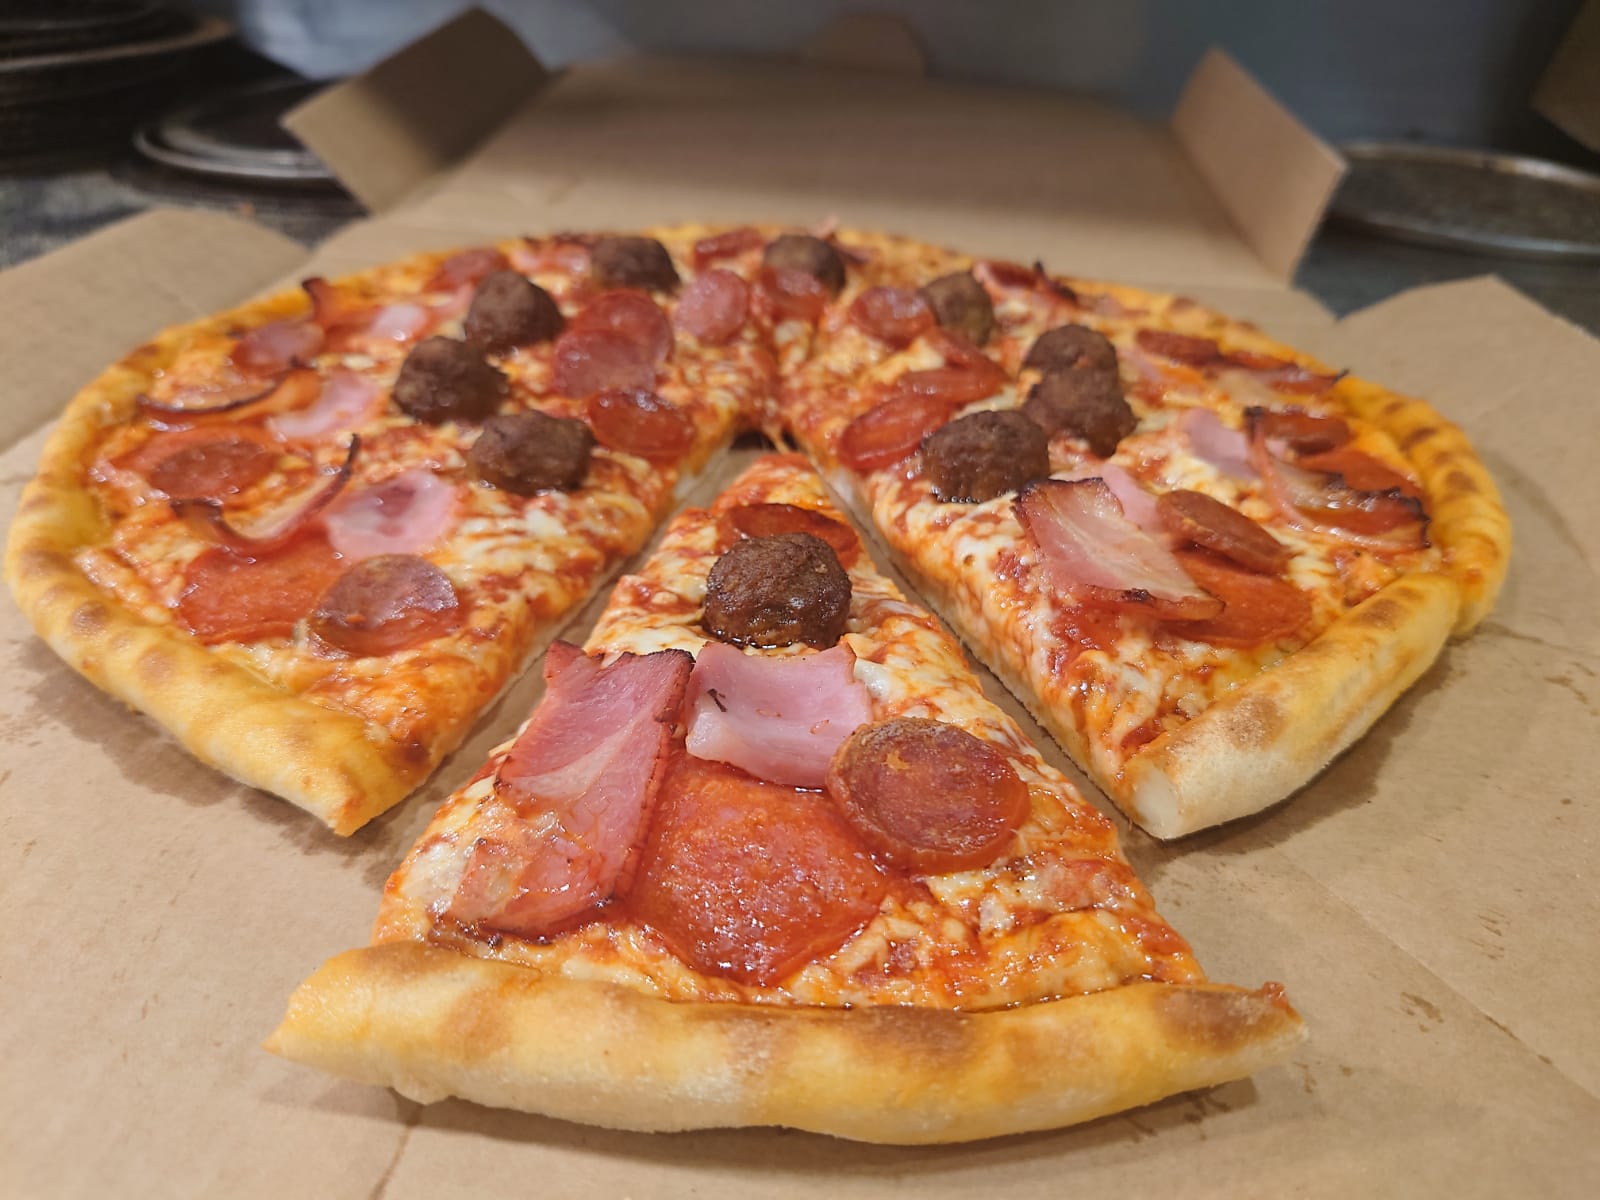 Domino's Pizza - Haverfordwest Haverfordwest 01437 768668